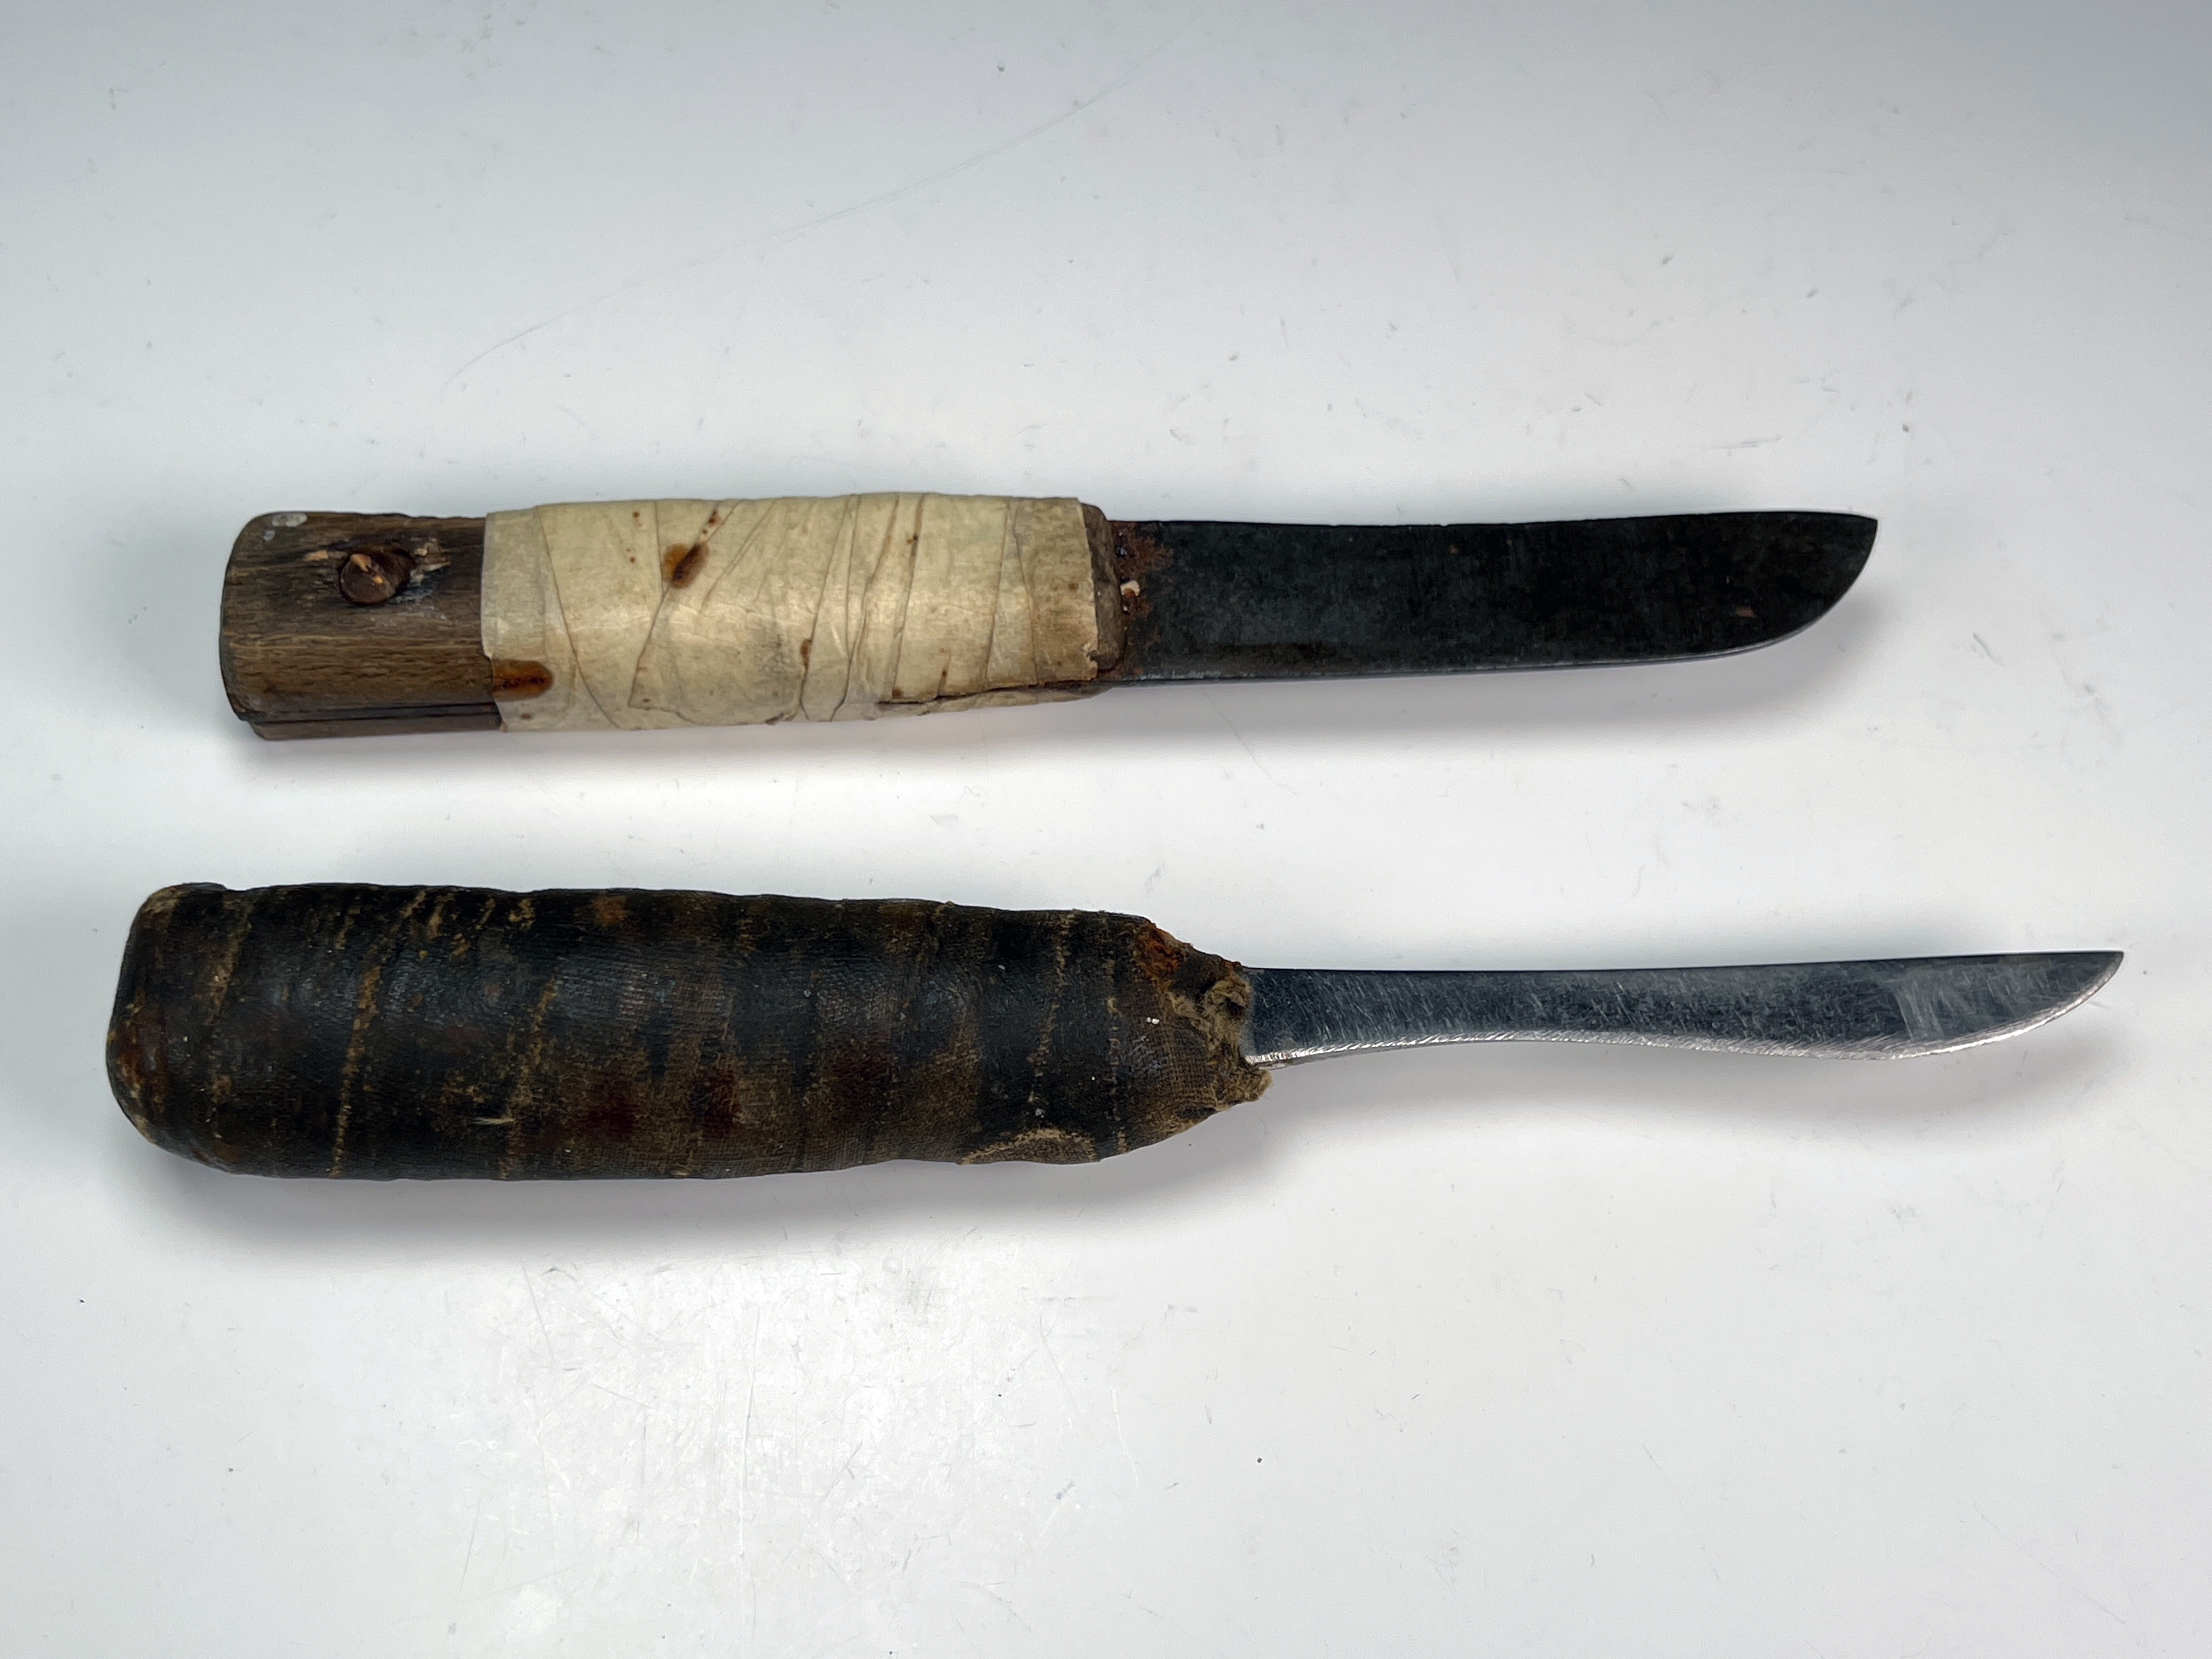 Pair Of Vintage Shiv Knives With Wrapped Wooden Handles - 8.5 Inches image 1